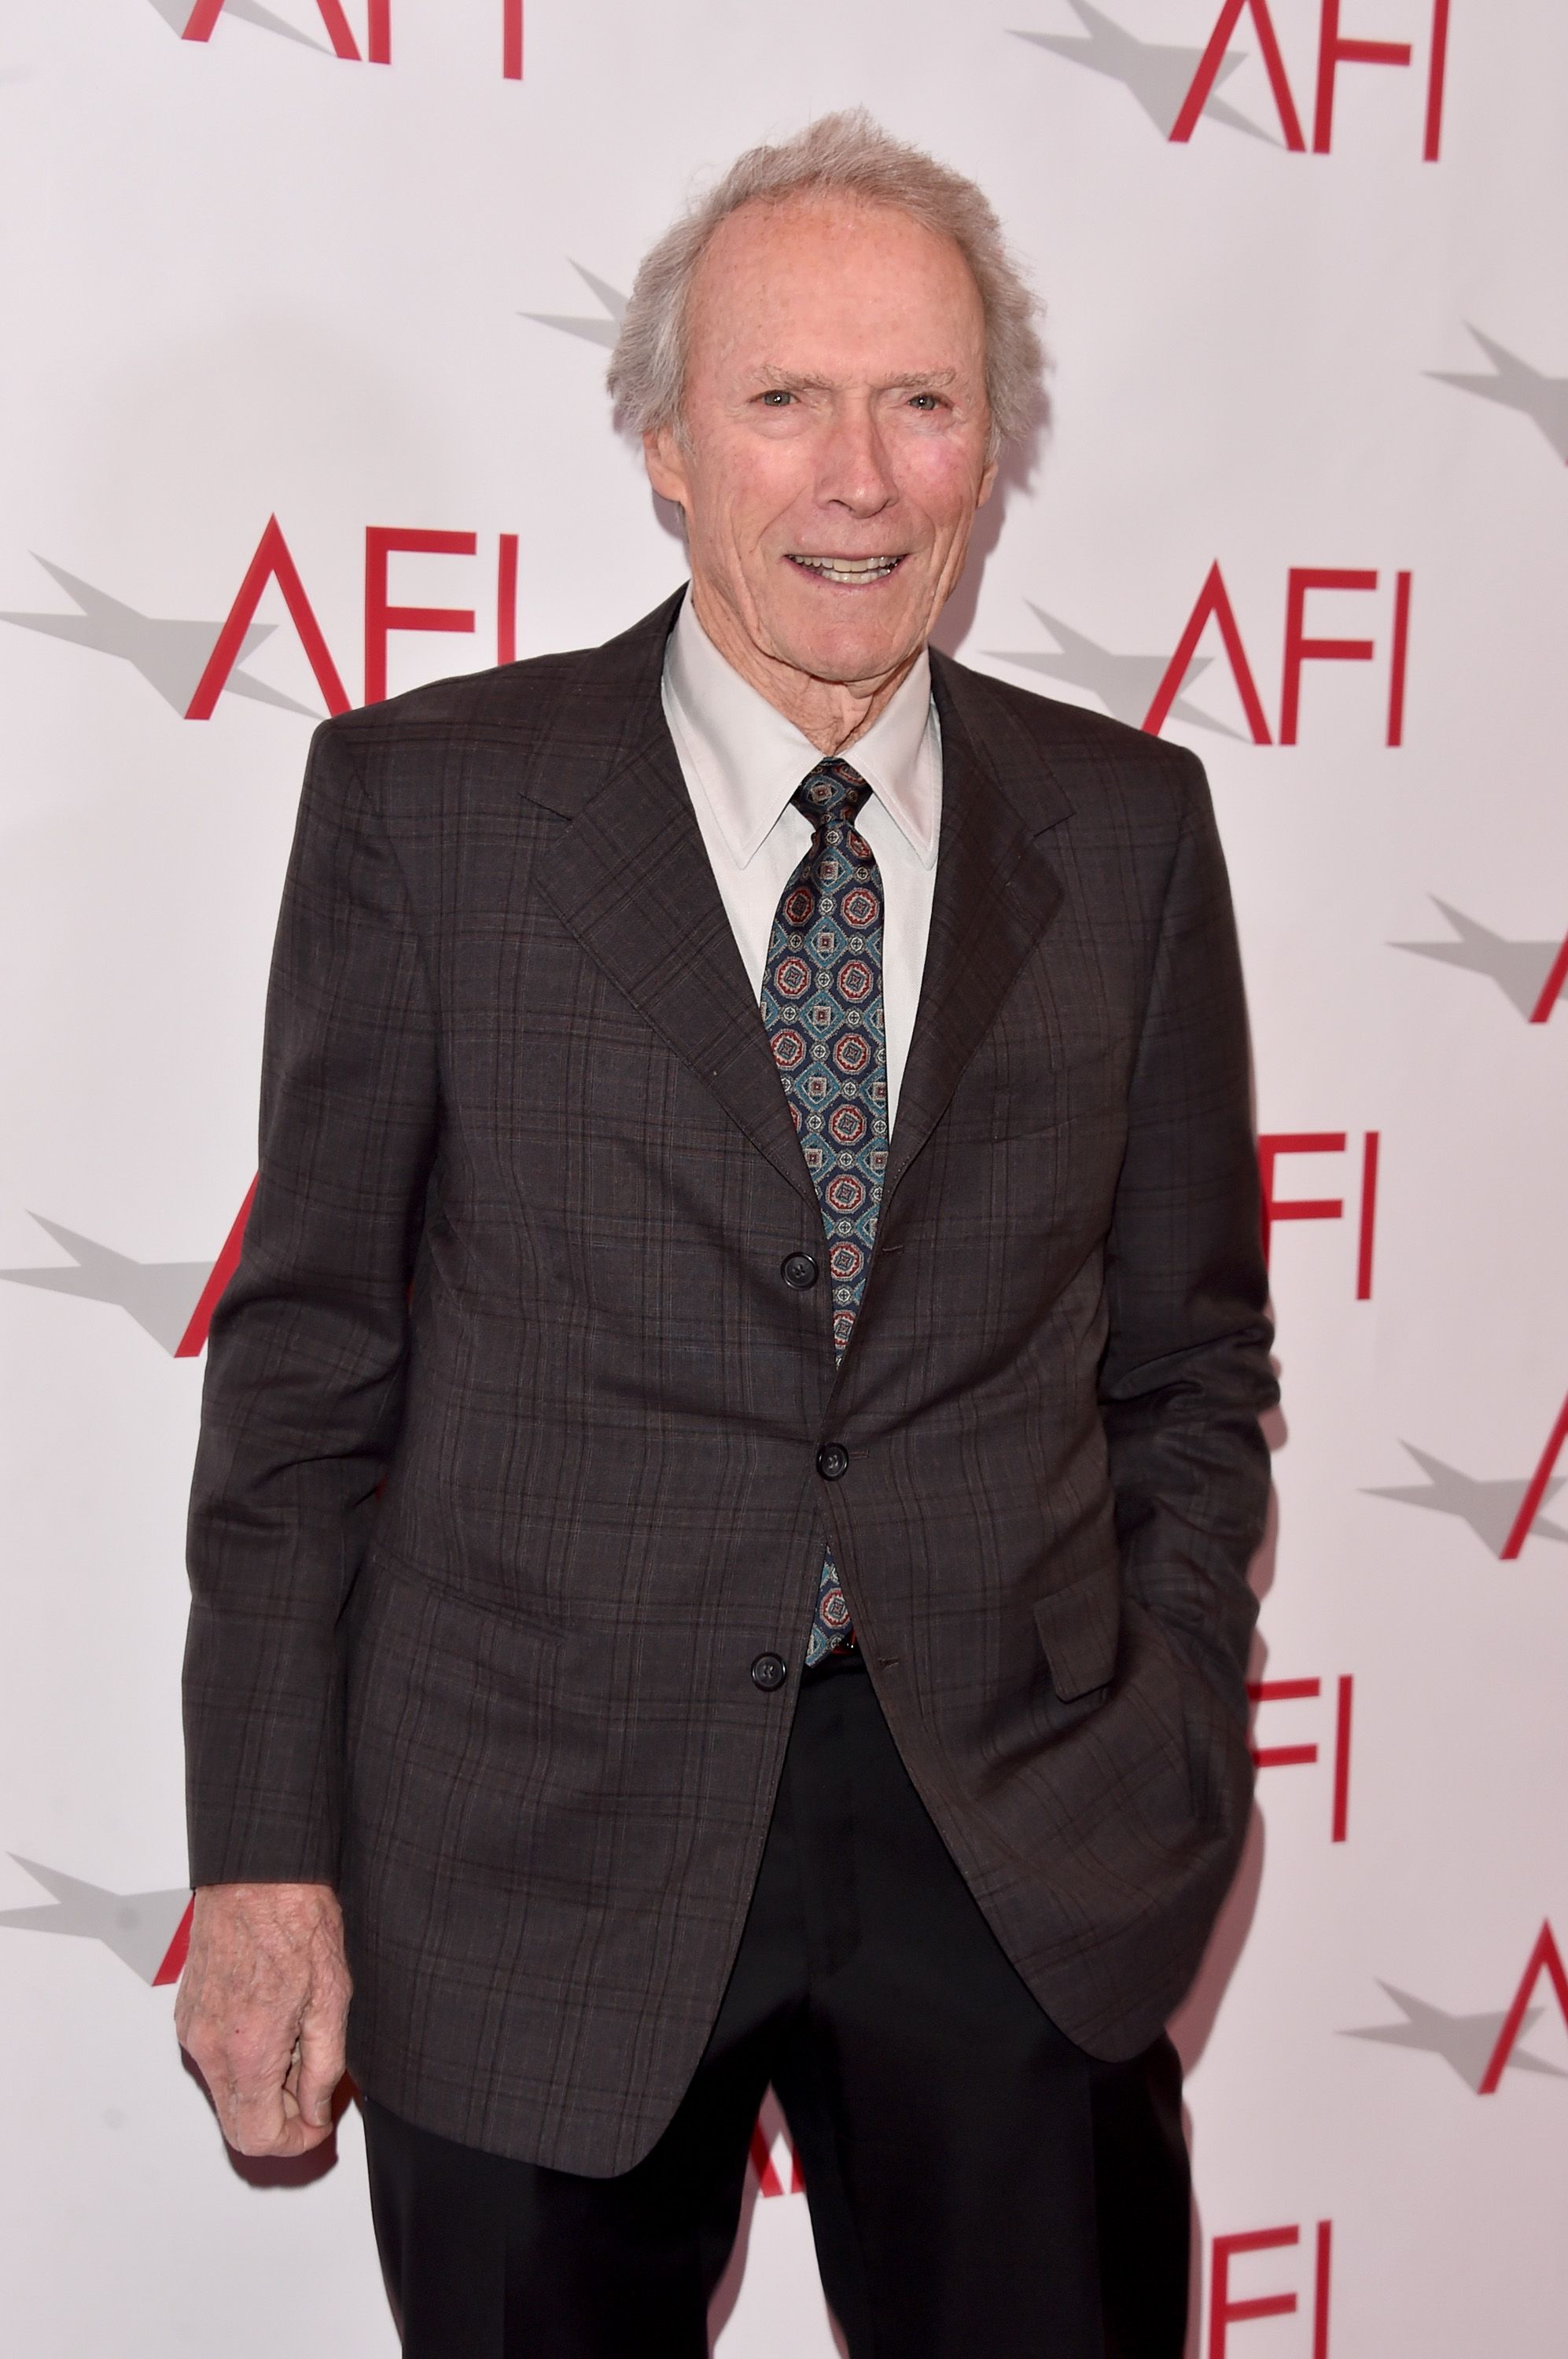 Clint Eastwood at the 17th annual AFI Awards at Four Seasons Los Angeles at Beverly Hills on January 6, 2017 | Photo: Getty Images